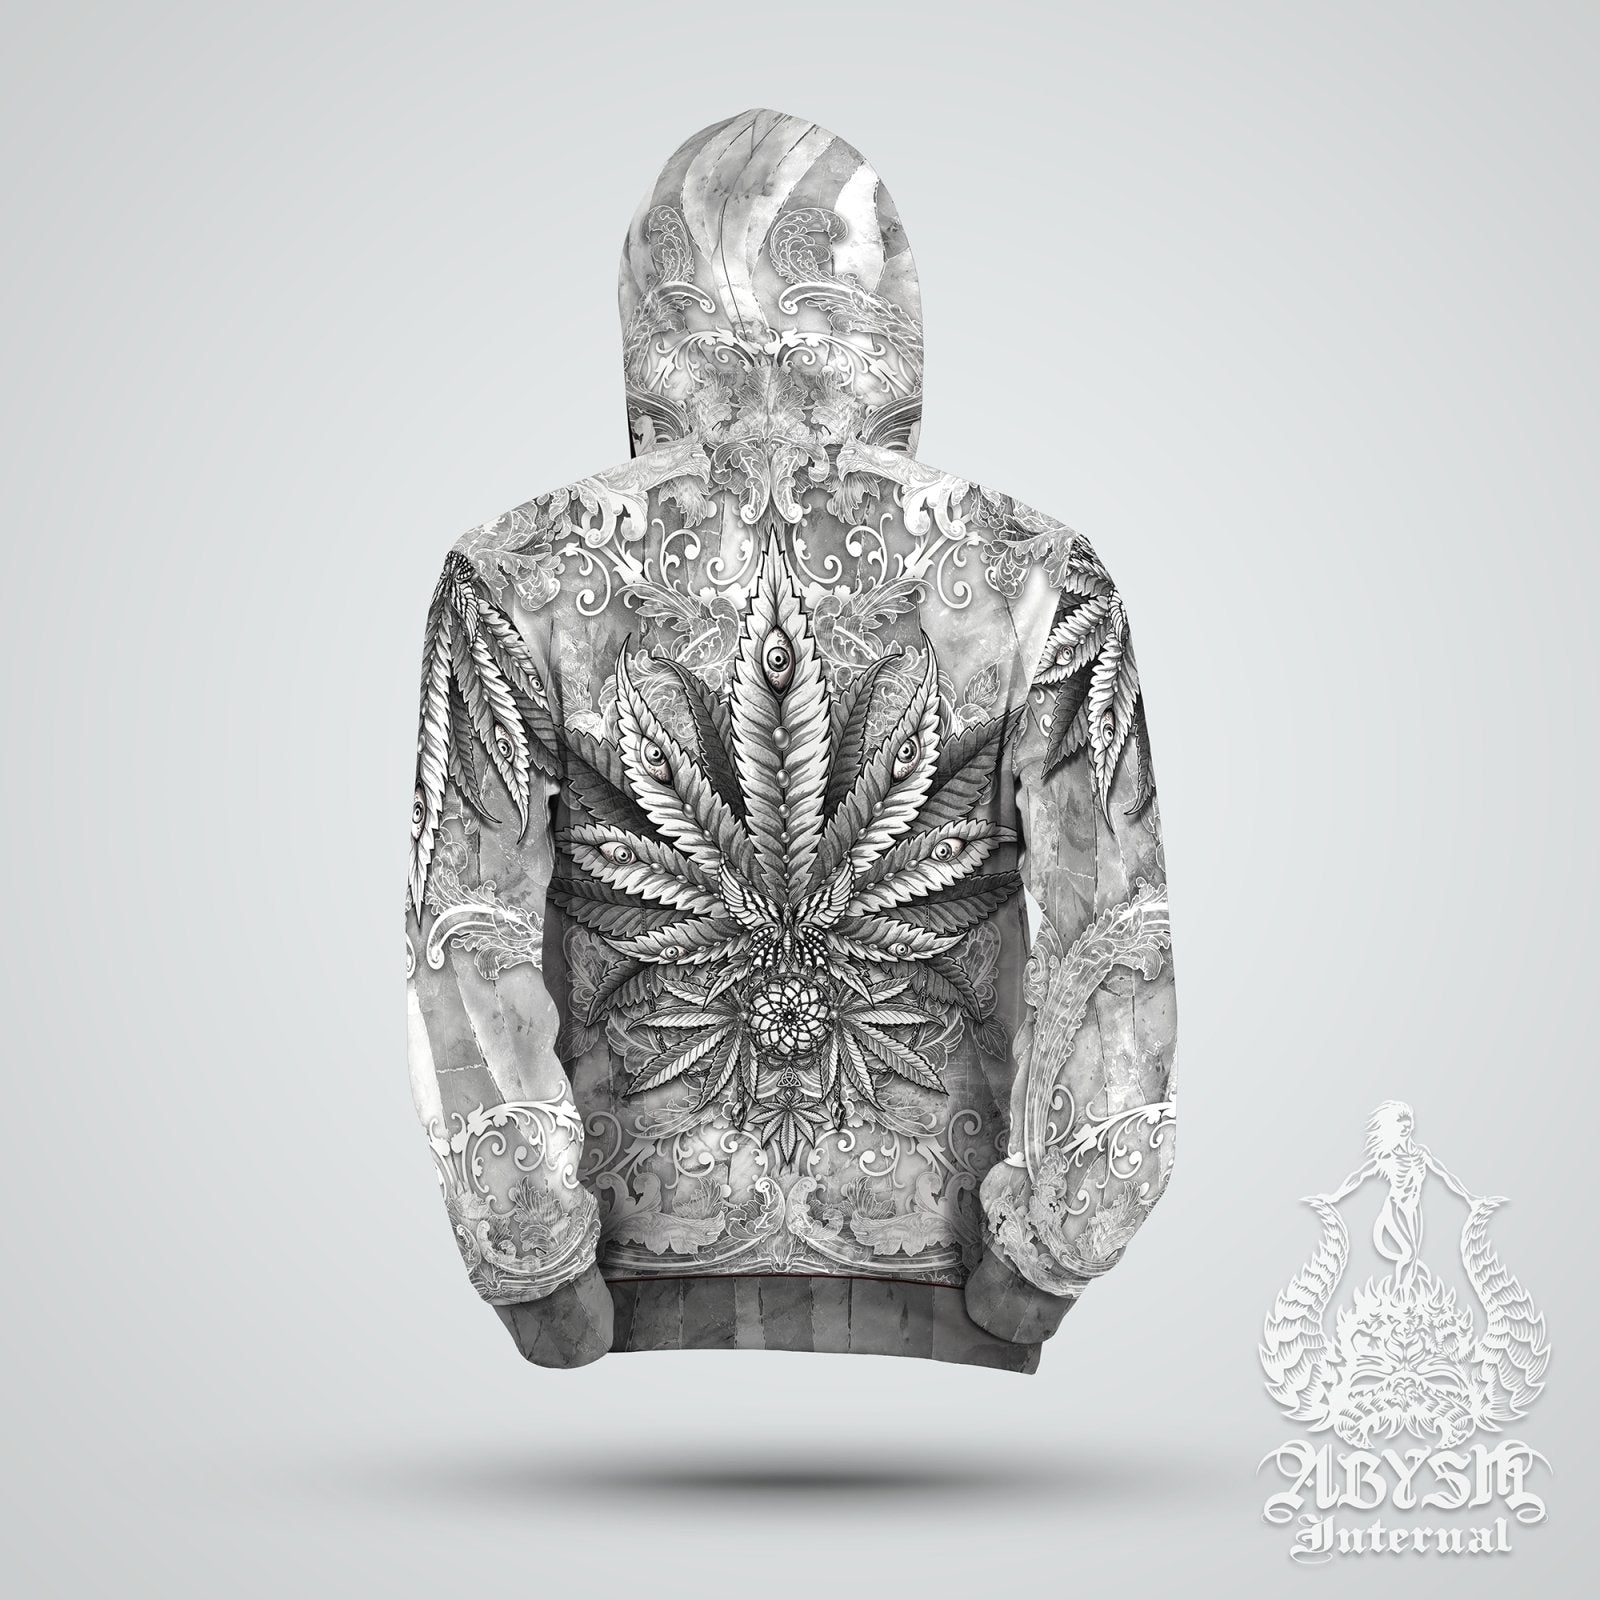 Cannabis Hoodie, Weed Clothes, Indie Festival Outfit, White Goth Streetwear, Hippie and Alternative Clothing, Unisex, 420 Gift - Stone, Marijuana - Abysm Internal